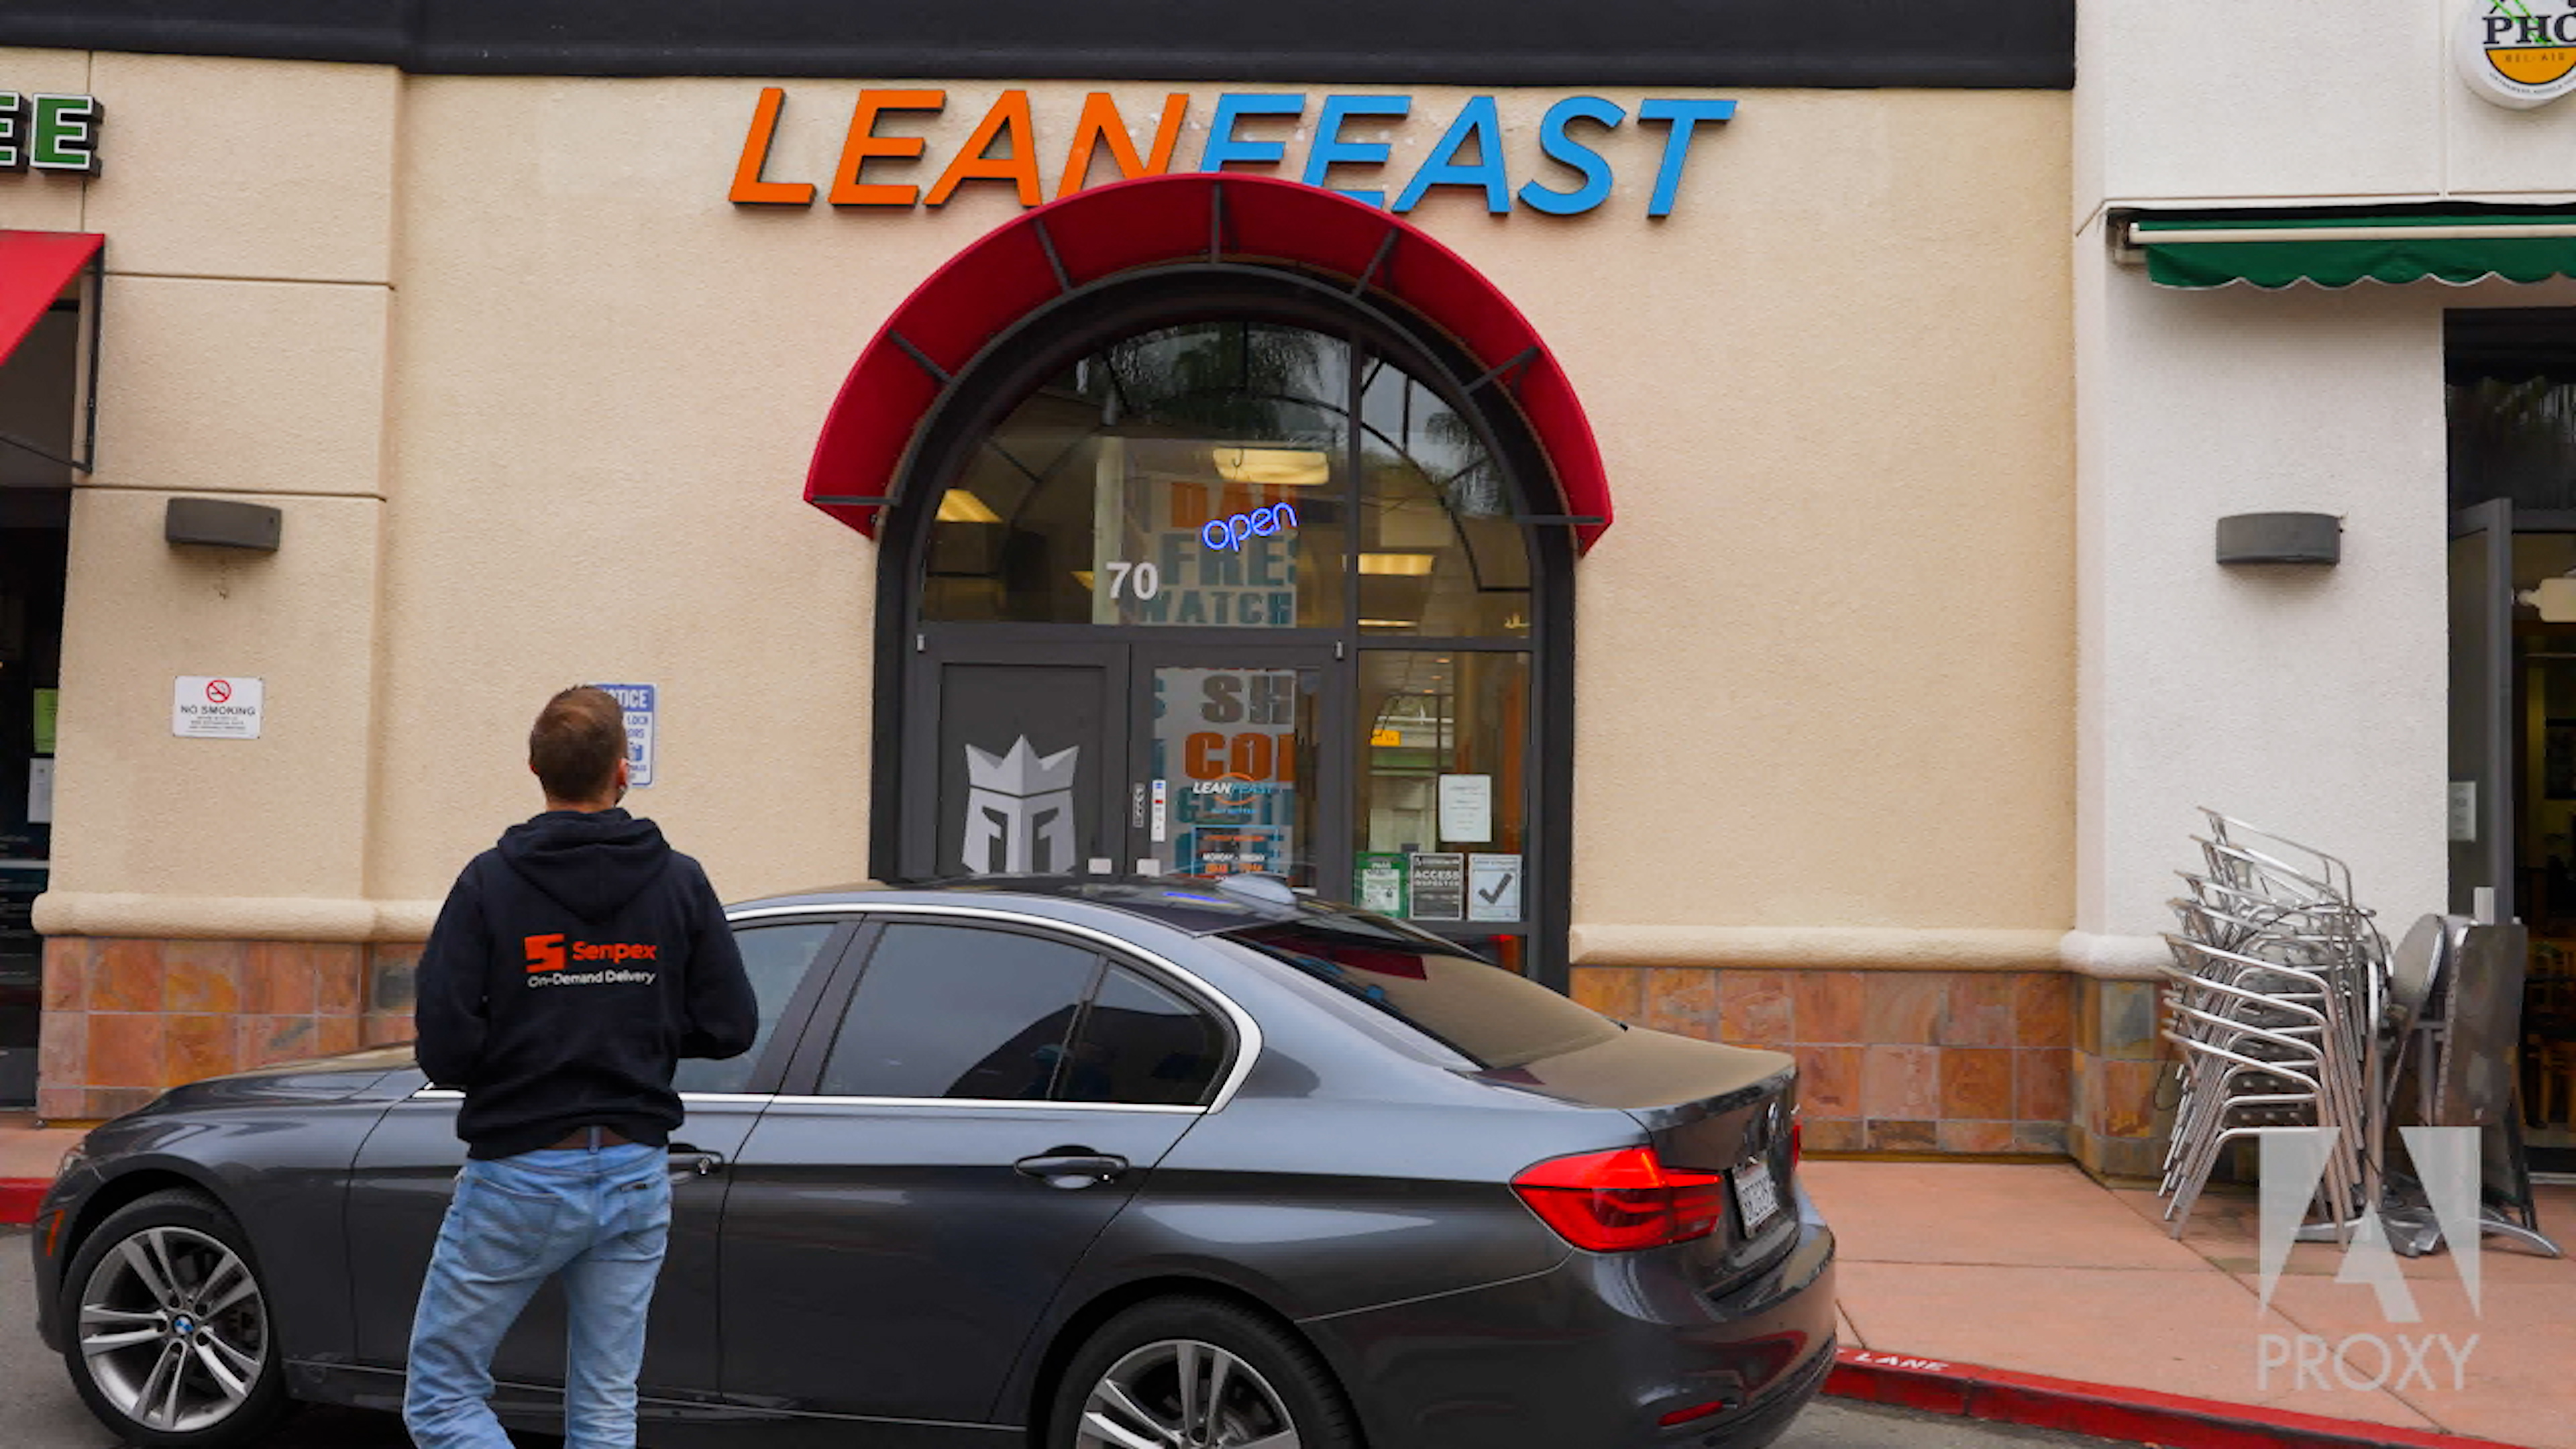 Senpex and Leanfeast Enters into Food Delivery Partnership